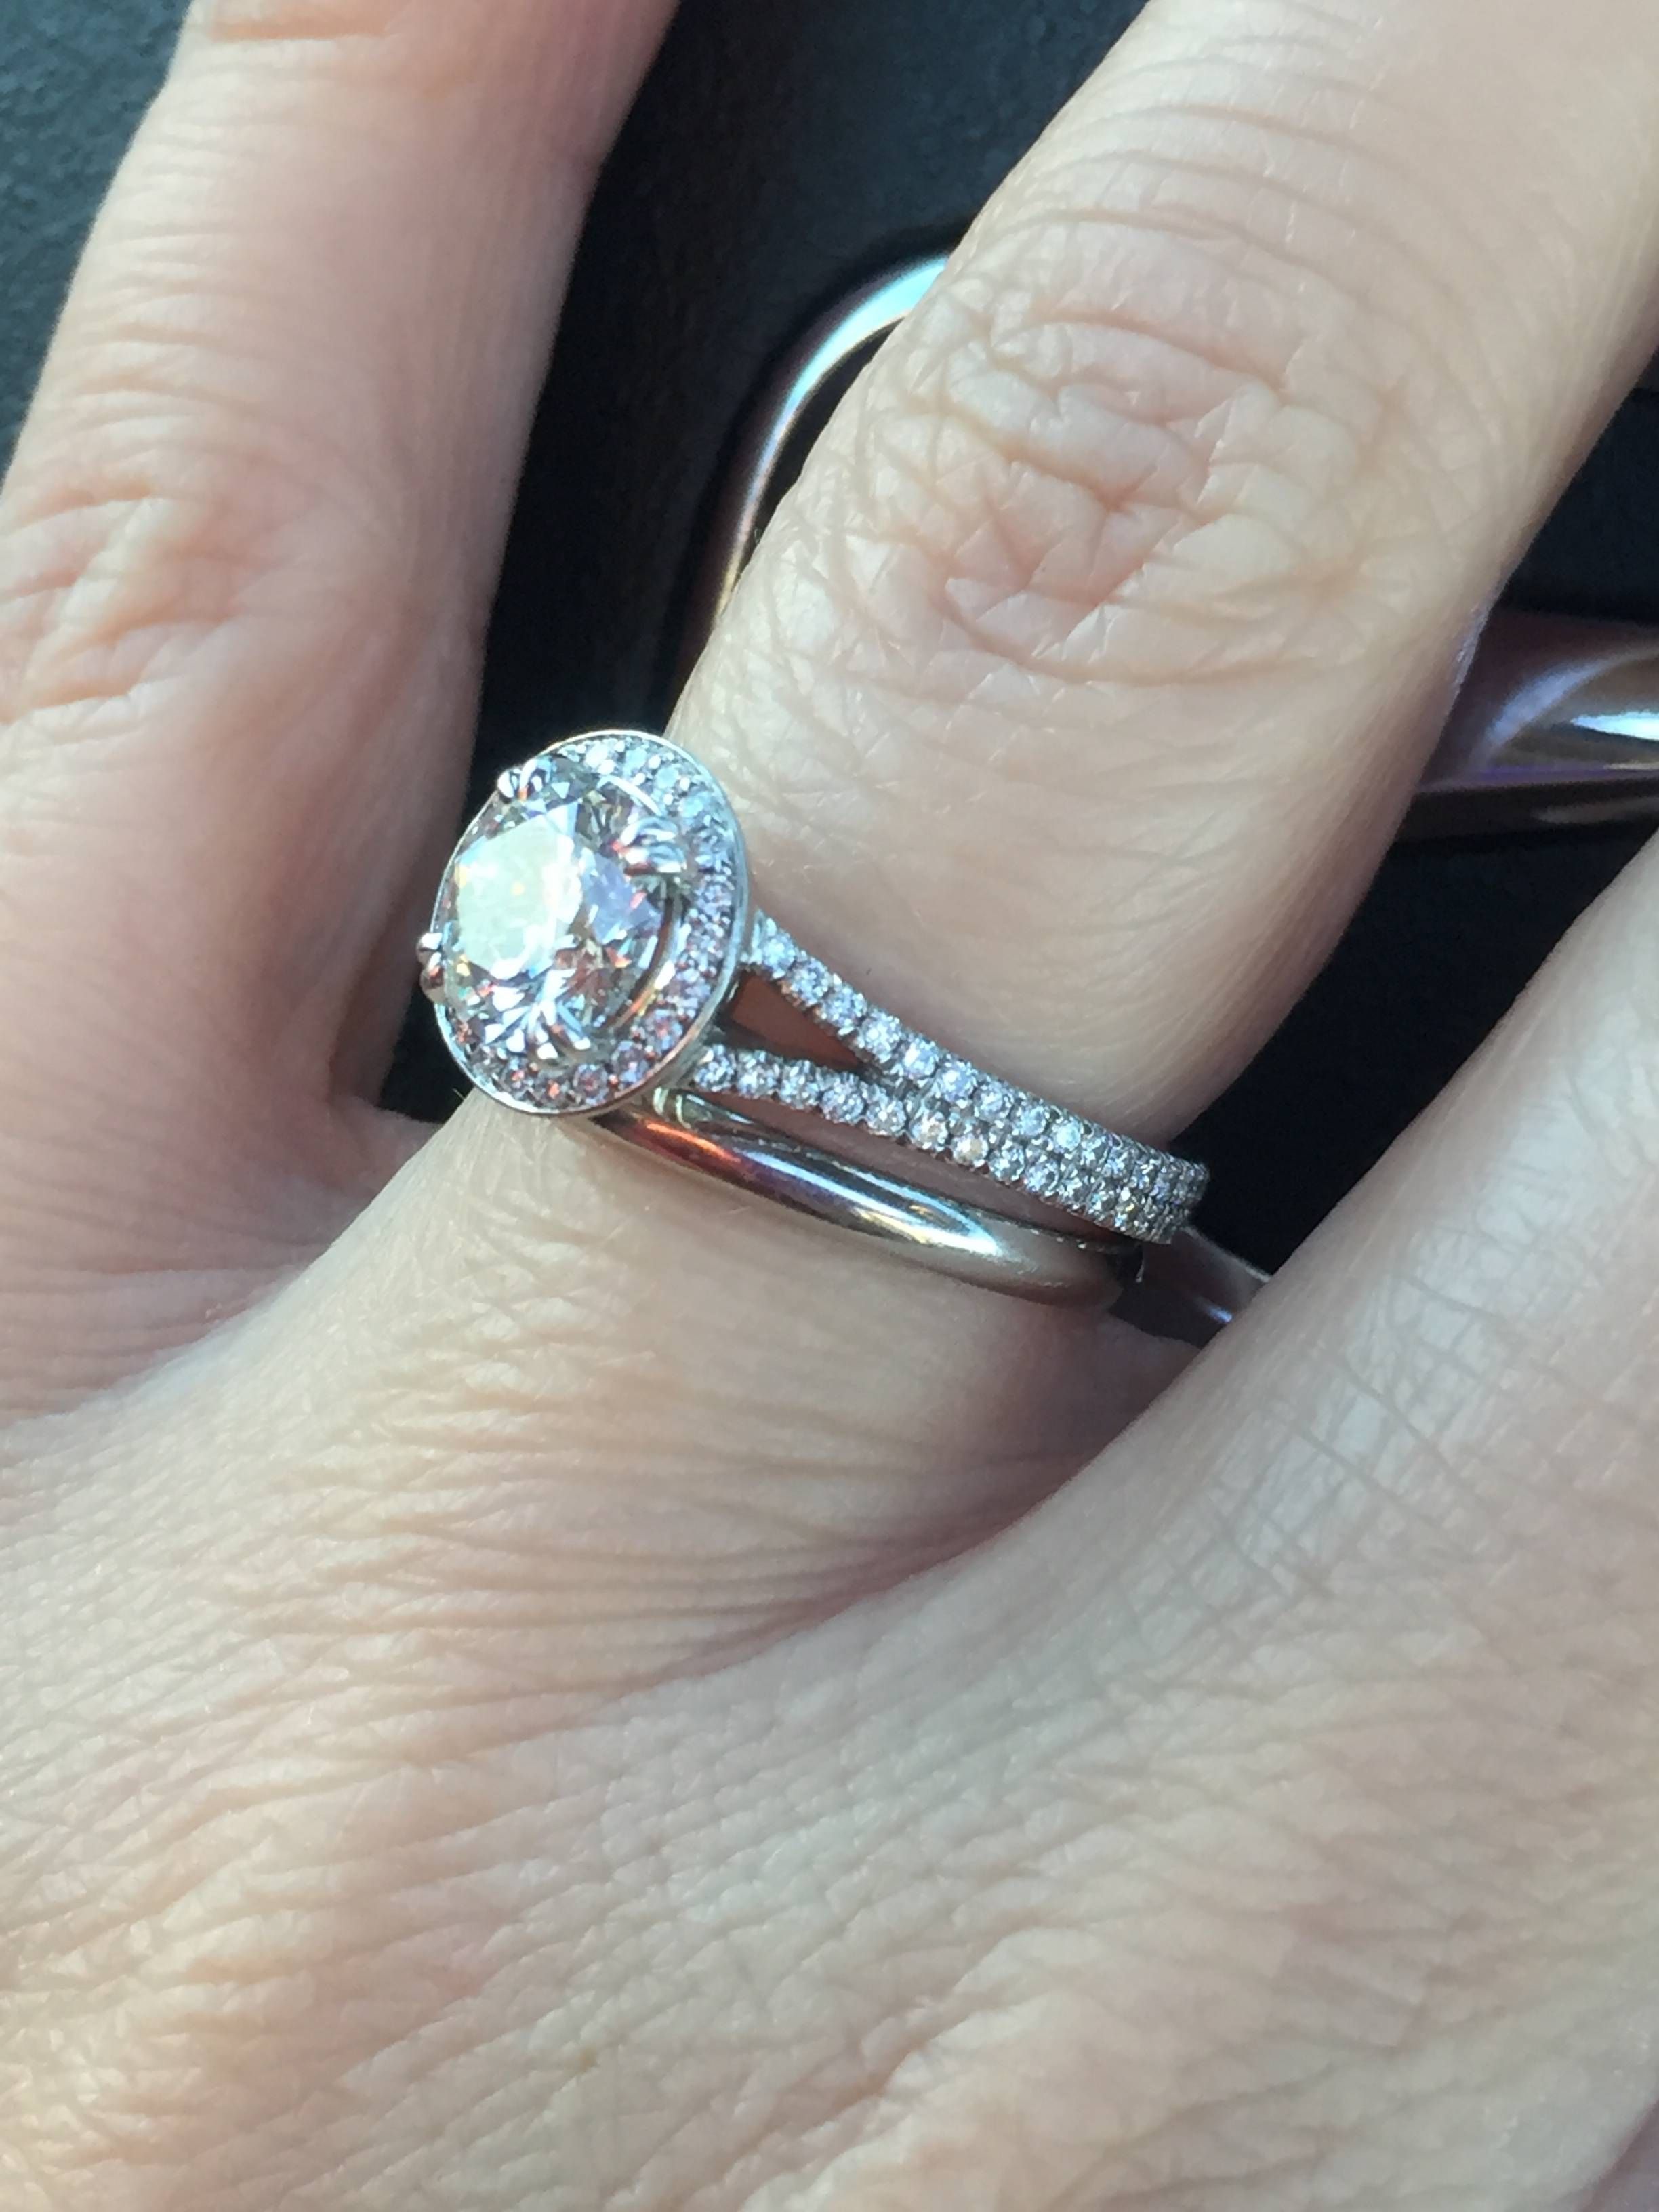 Show Me Your Plain Wedding Band With Your Engagement Ring Pertaining To Wedding Band And Engagement Rings (View 6 of 15)